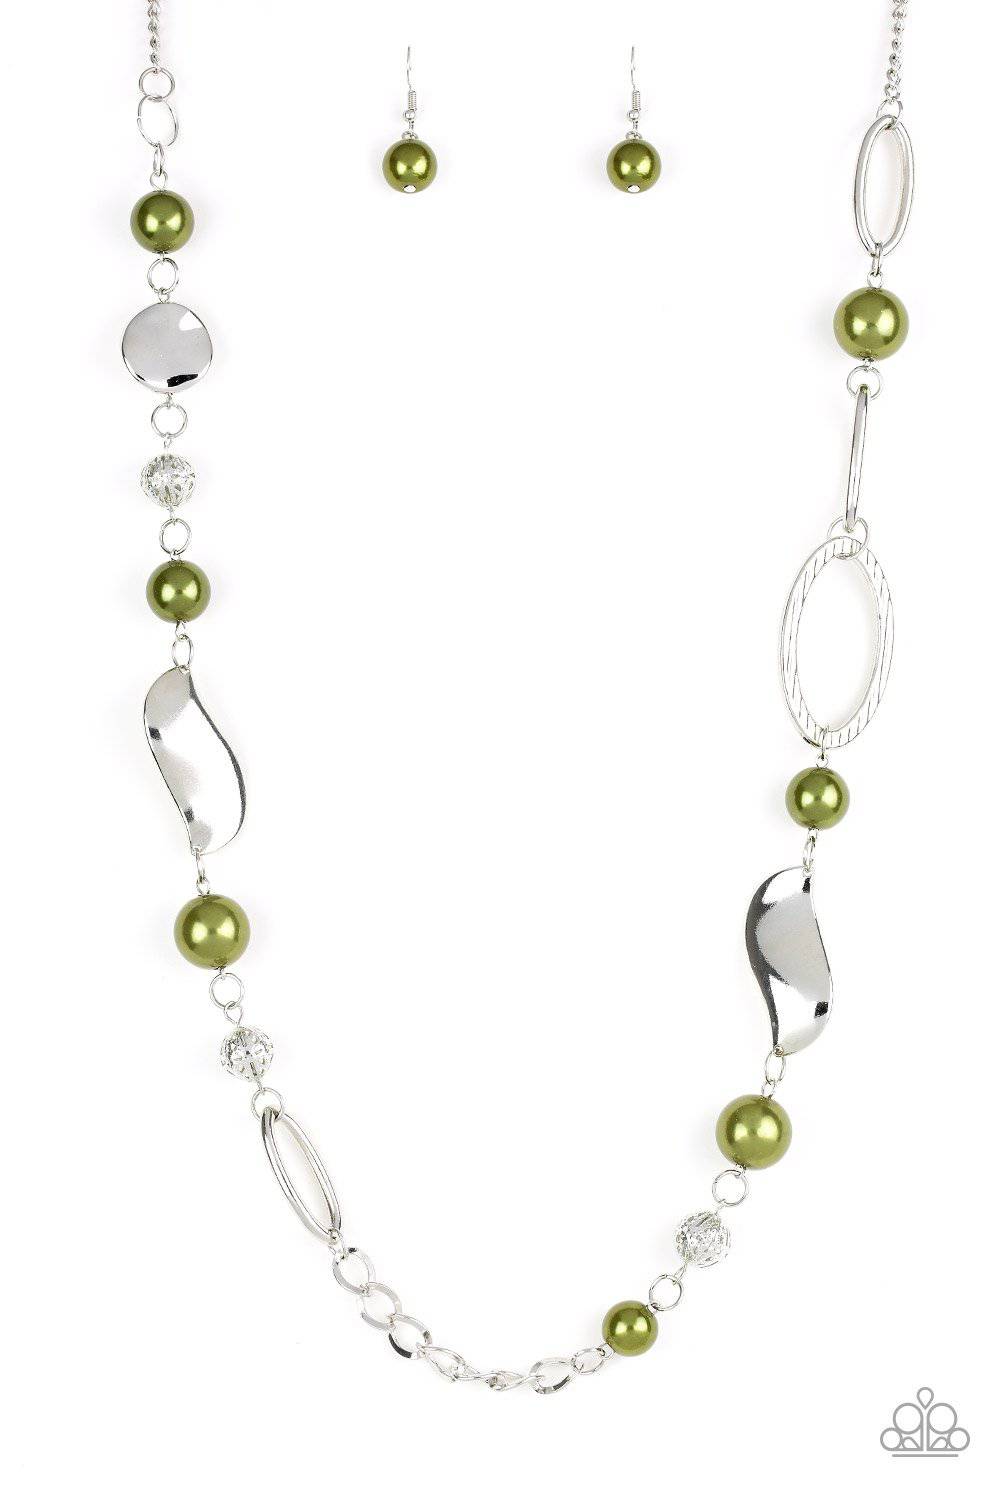 All About Me - Green Pearls & Silver Necklace - Paparazzi Accessories - GlaMarous Titi Jewels